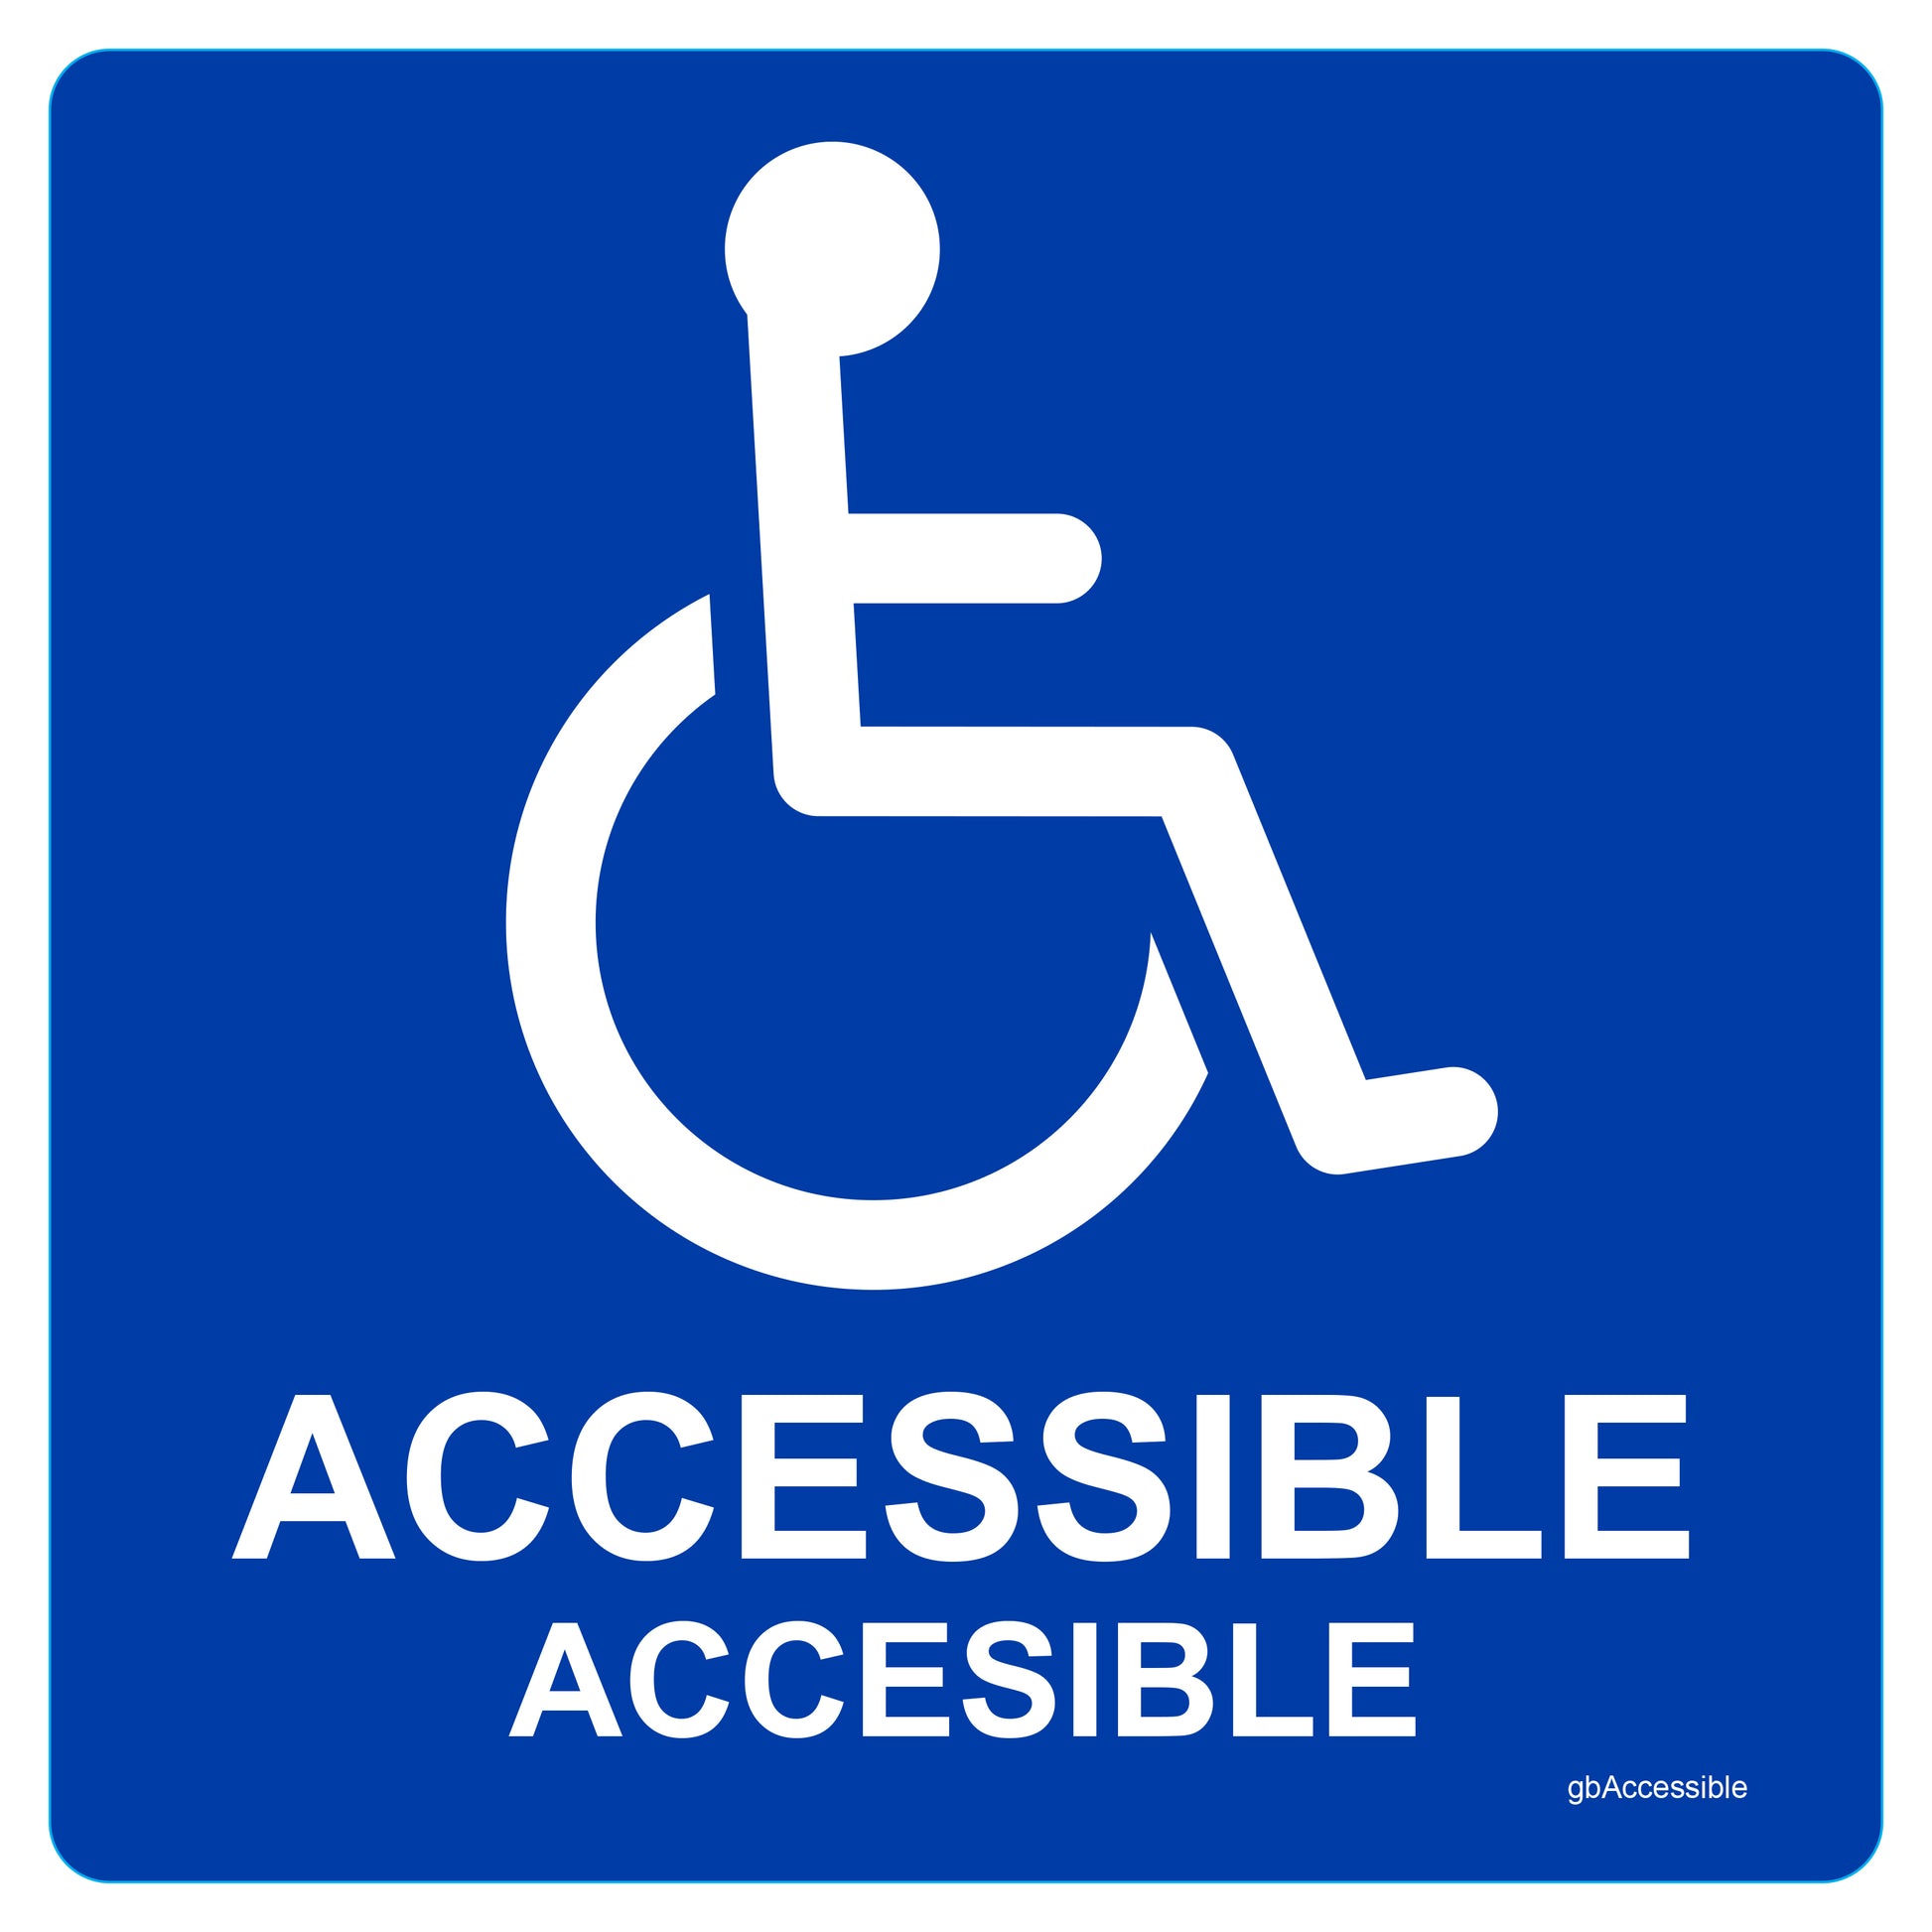 ADA Accessible Decal in English and Spanish. 5 inches by 5 inches in size.